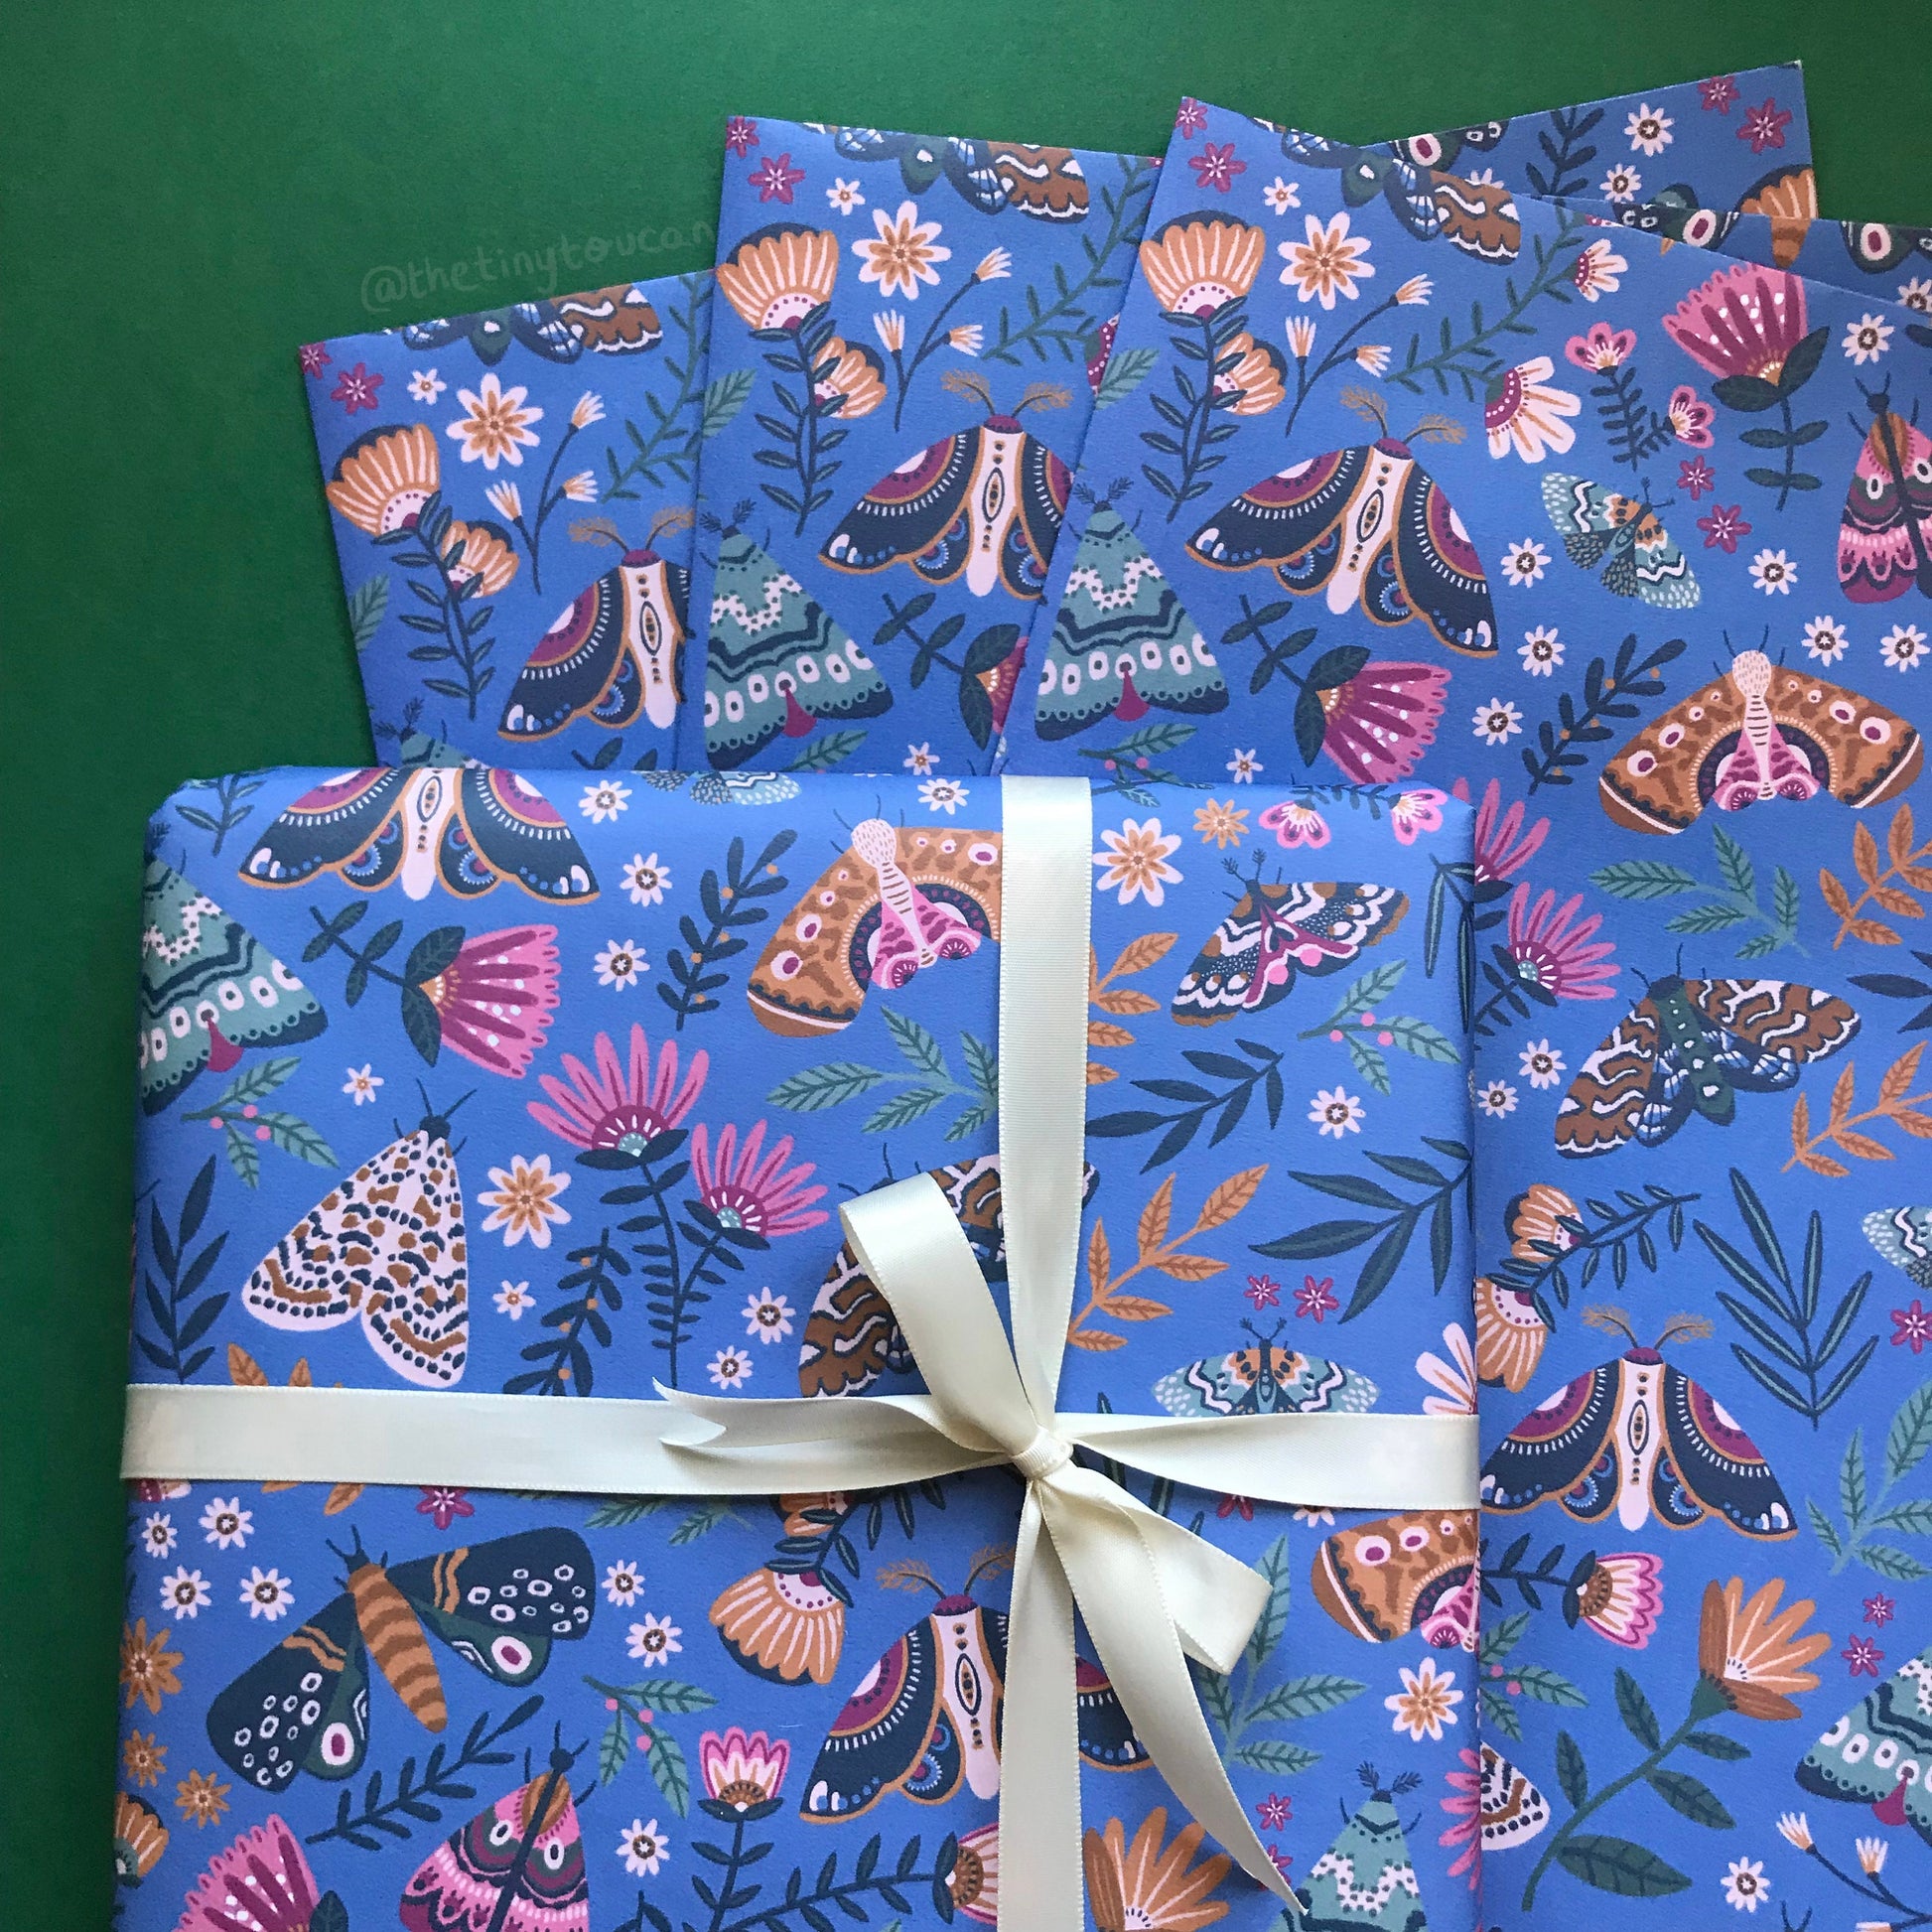 Moth Wrap- (A2+ Folded Sheet) Moth illustrated wrapping paper- Butterfly- Pretty Stationery- Gift Wrap- Moth gift- sustainable stationery